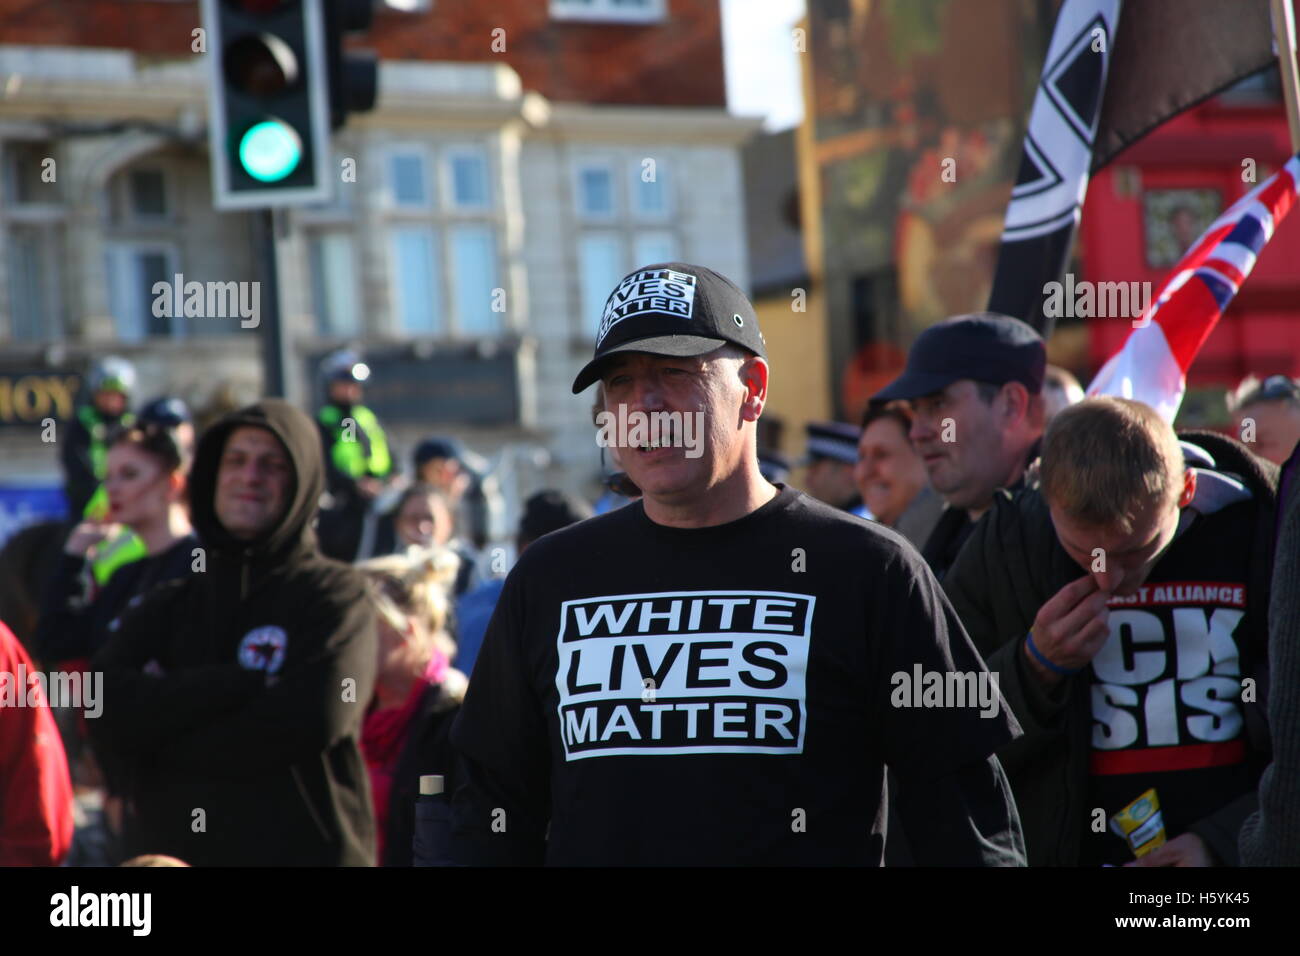 Margate, Kent, UK. 22nd October, 2016. Demonstrator with white lives matter message. The right wing group White Lives Matter (WLM) march in the town. This is the first WLM demonstration in the UK. A counter demonstration, Margate Rocks Against Racism (MRAR) is taking place in the town at the same time. Penelope Barritt/Alamy Live News Stock Photo